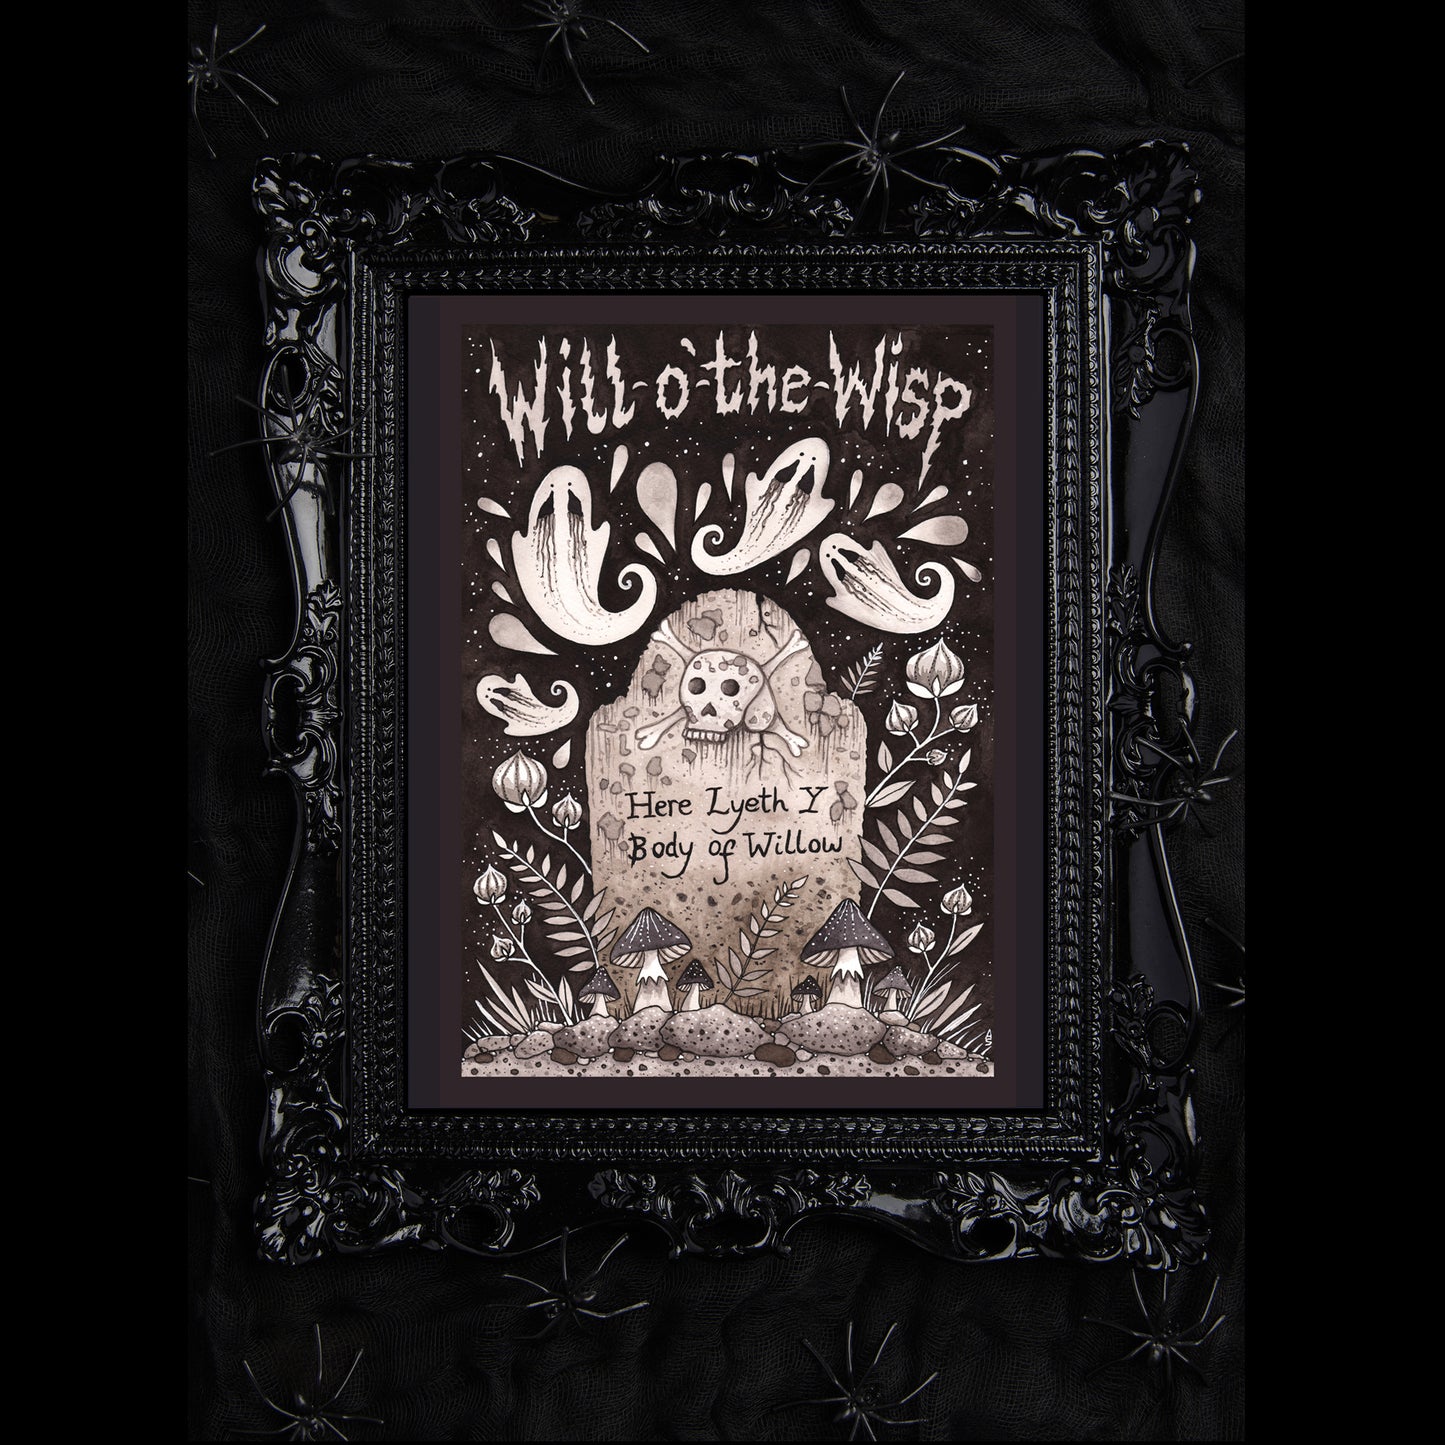 Will-o'-the-Wisp Print - Spooky Halloween Graveyard Ghosts A5 - A4 - A3 Spooky Ghosts Autumn Leaves Wall Art Decoration